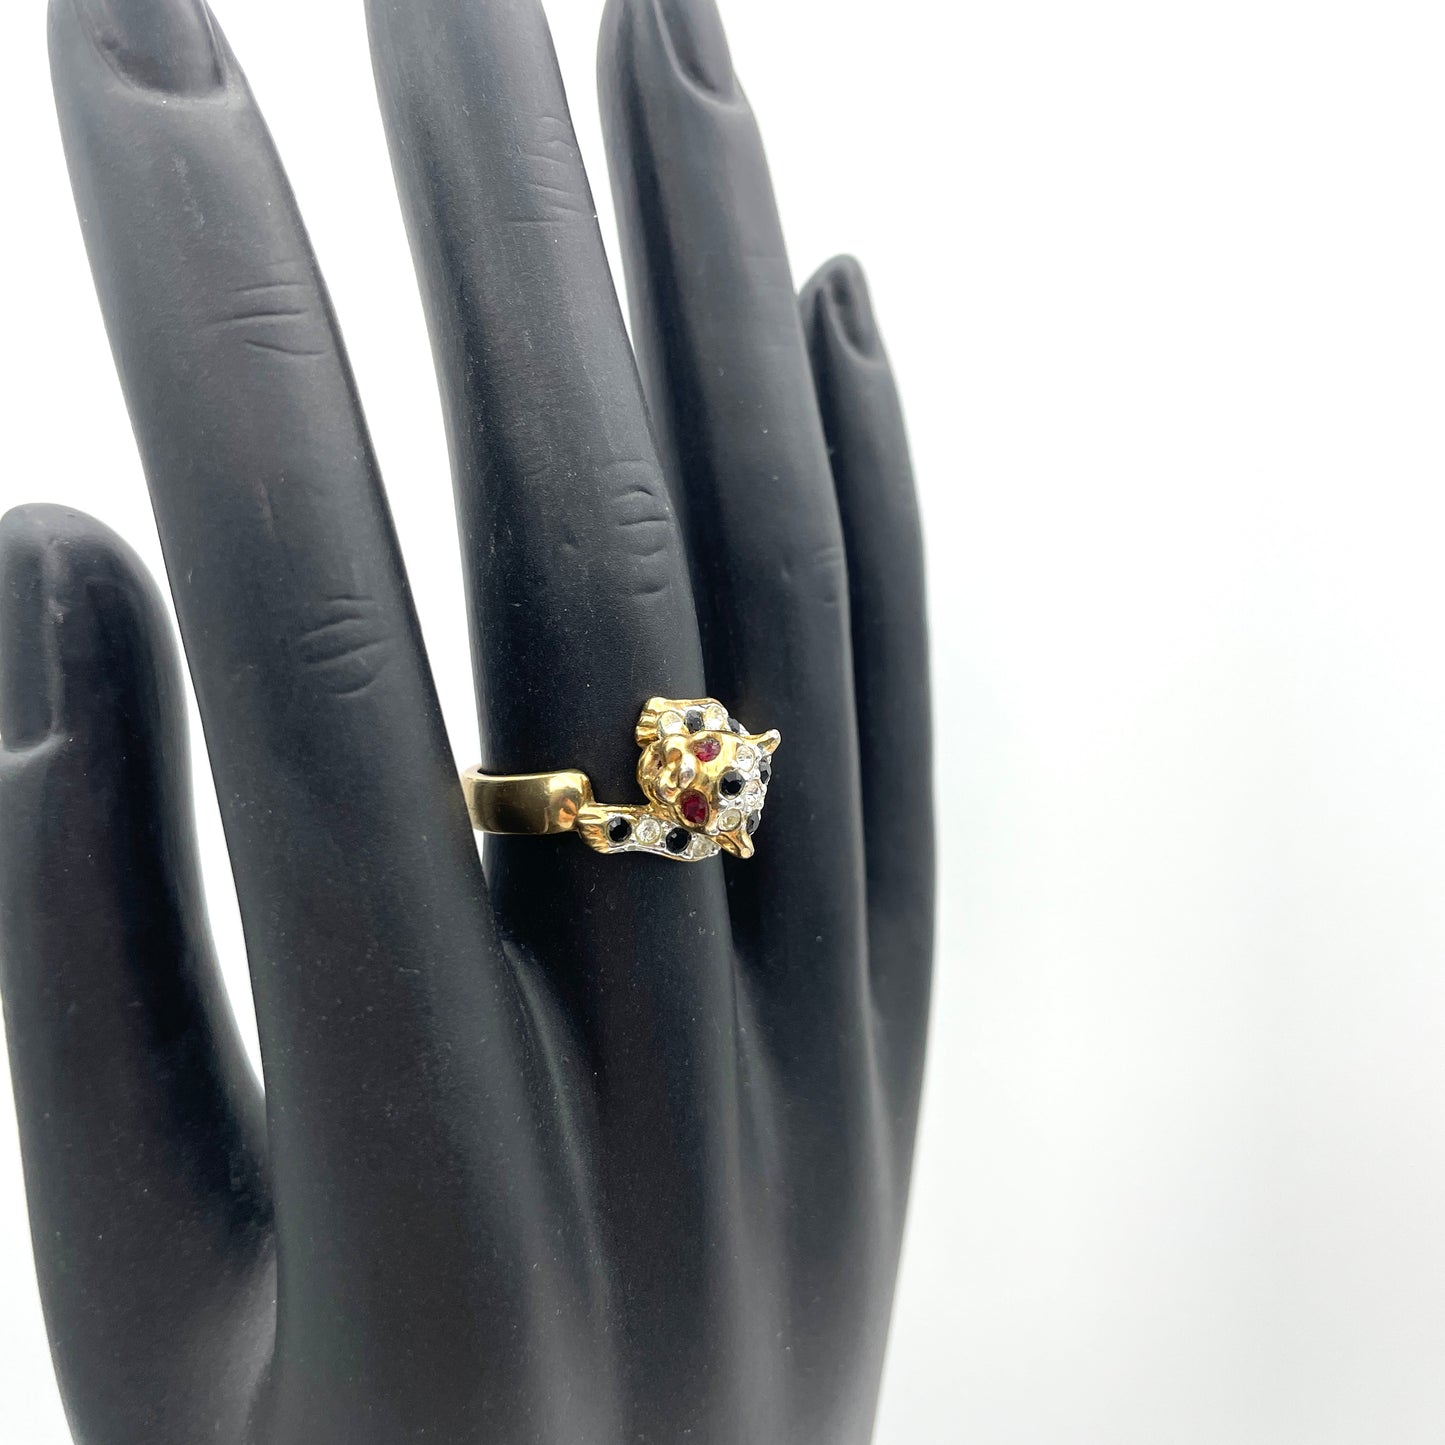 Leopard Crystal Ring - Size 8